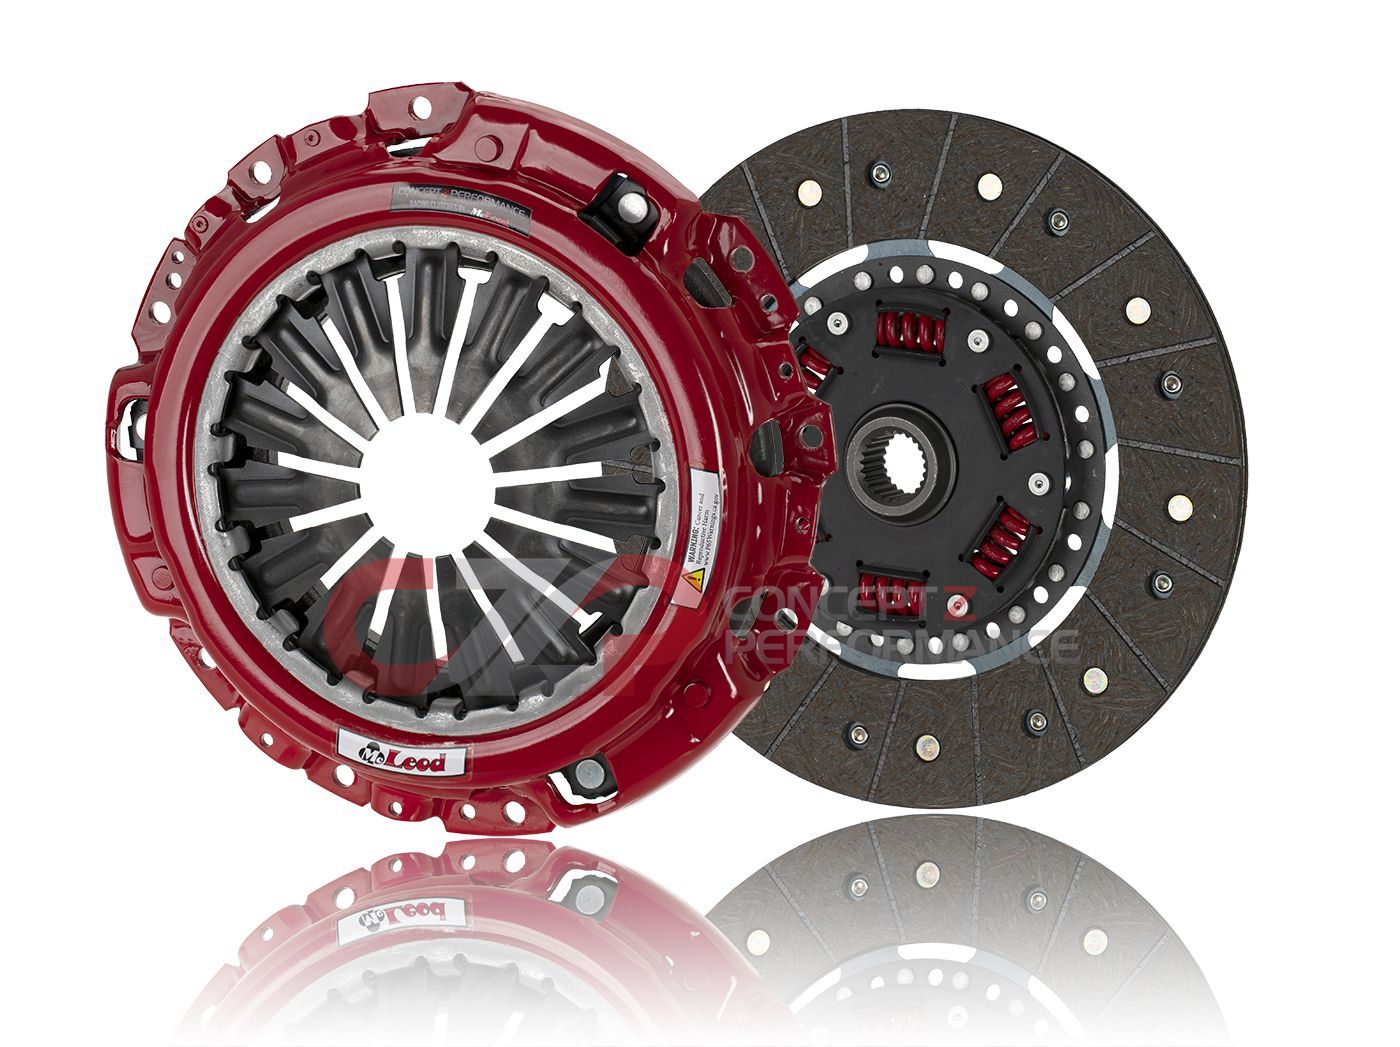 McLeod Racing Stage 1 Supremacy Street Tuner RSB Steelback Clutch Kit - Nissan 300ZX 90-96 Non-Turbo Z32